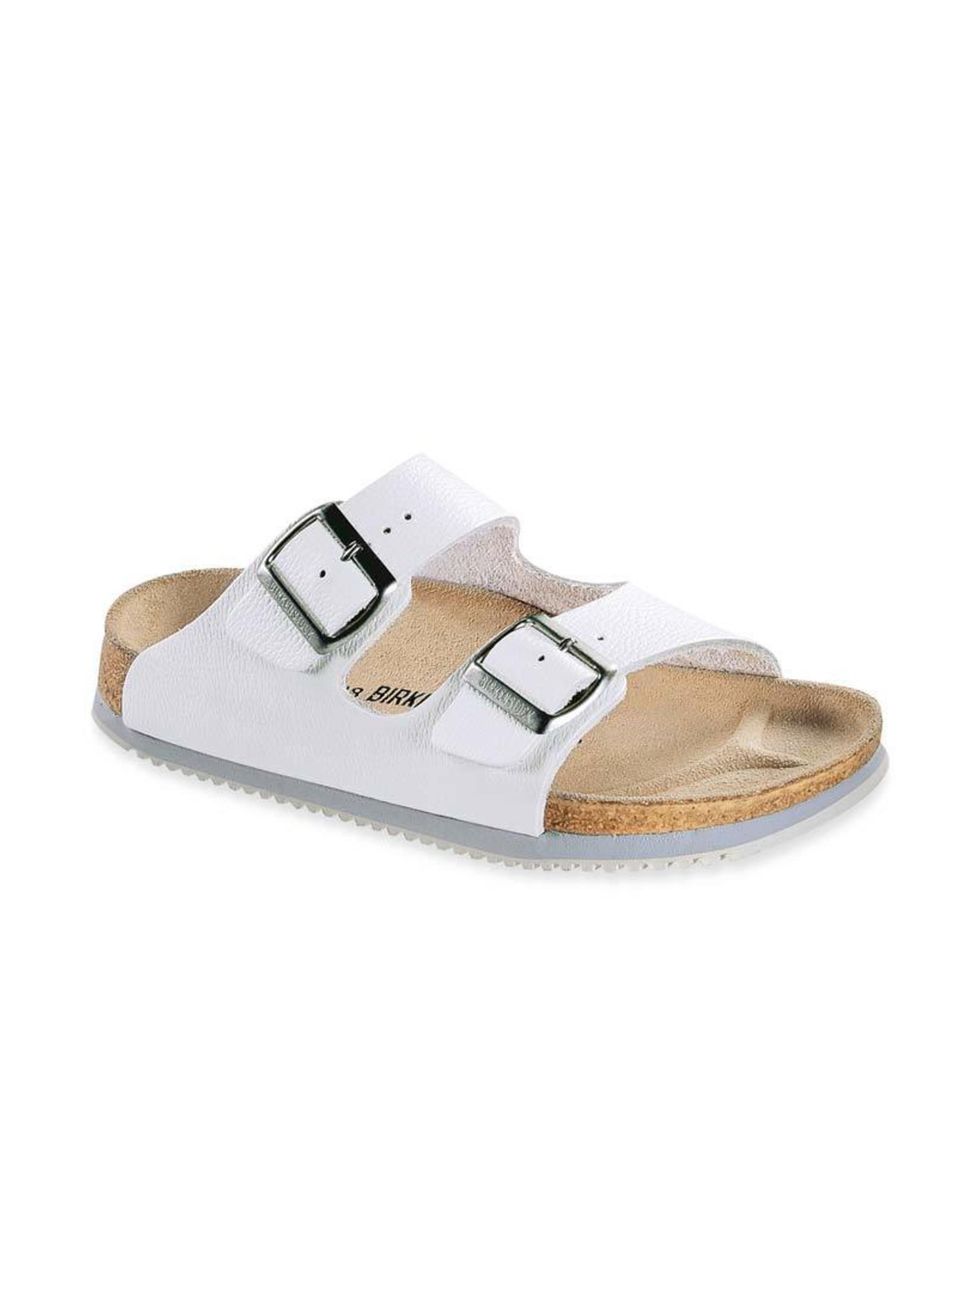 <p>Pair with rolled up blue jeans and an oversized shirt.</p>

<p>Birkenstocks, £69.95 at <a href="https://www.thenaturalshoestore.com/Product/170/Arizona-Leather-White-051131/" target="_blank">The Natural Shoe Store</a></p>